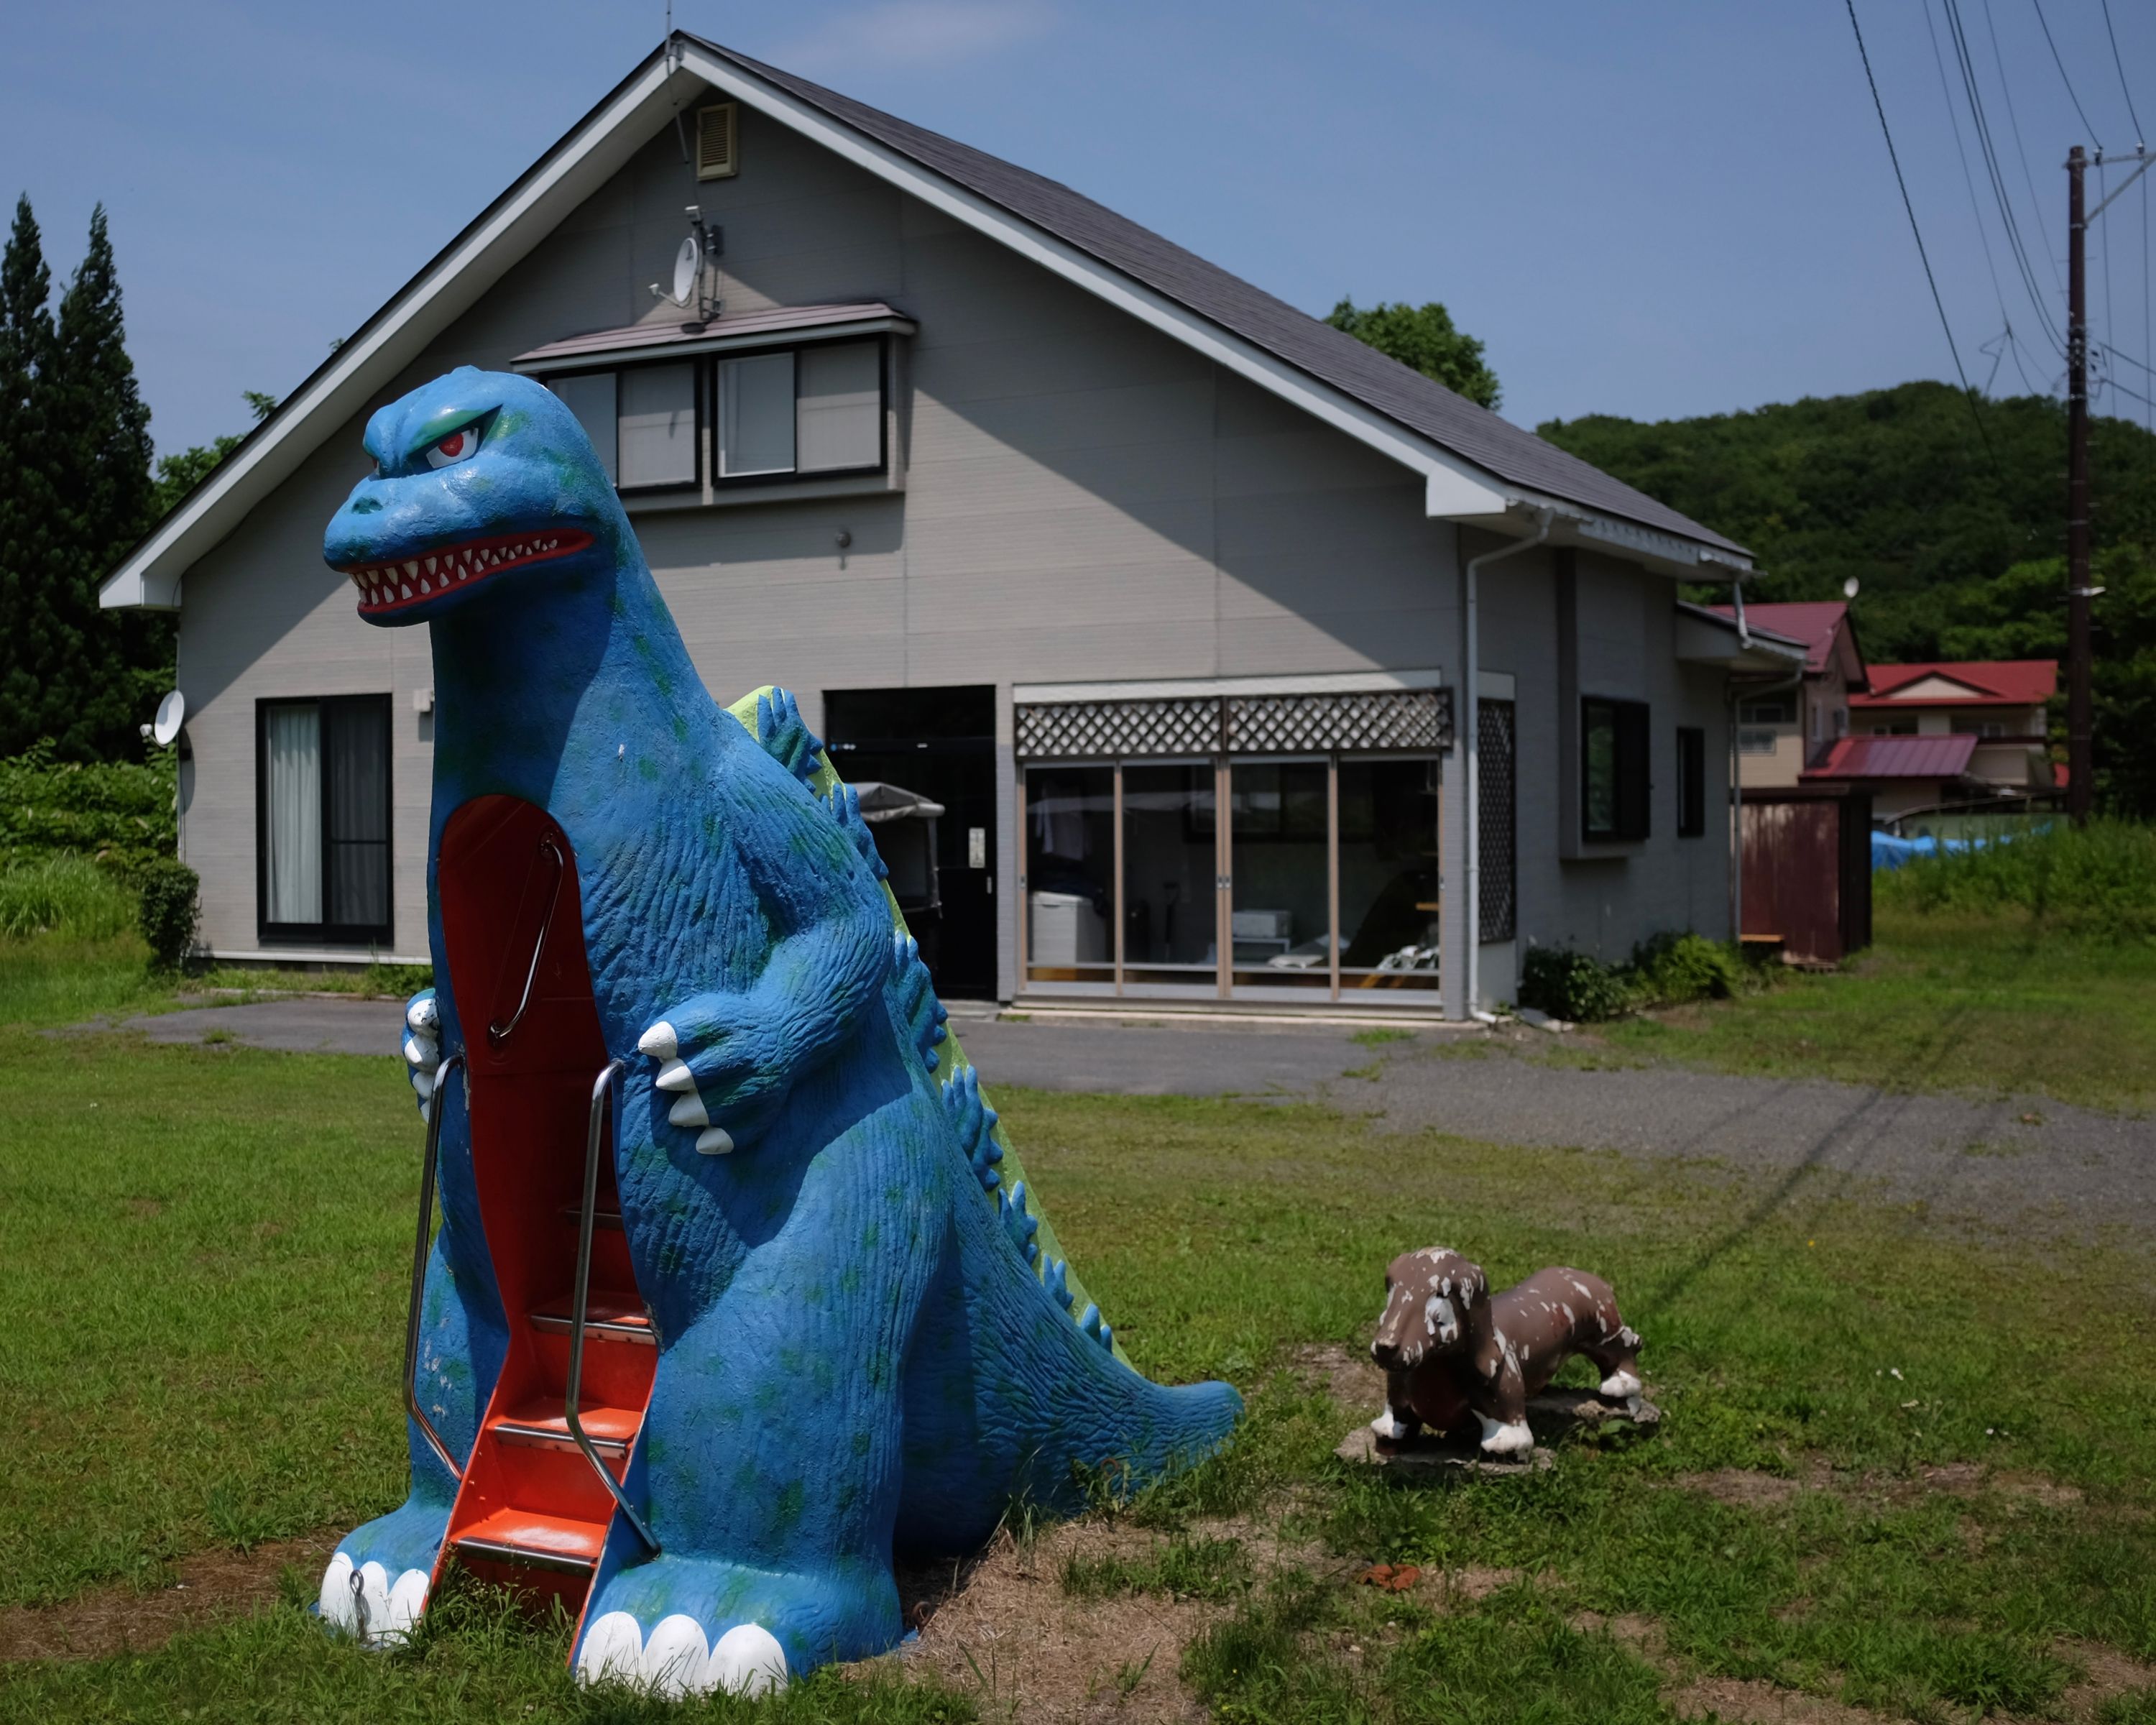 A blue Godzilla-shaped slide and a small brown dachshund stand guard in the front yard of a house.